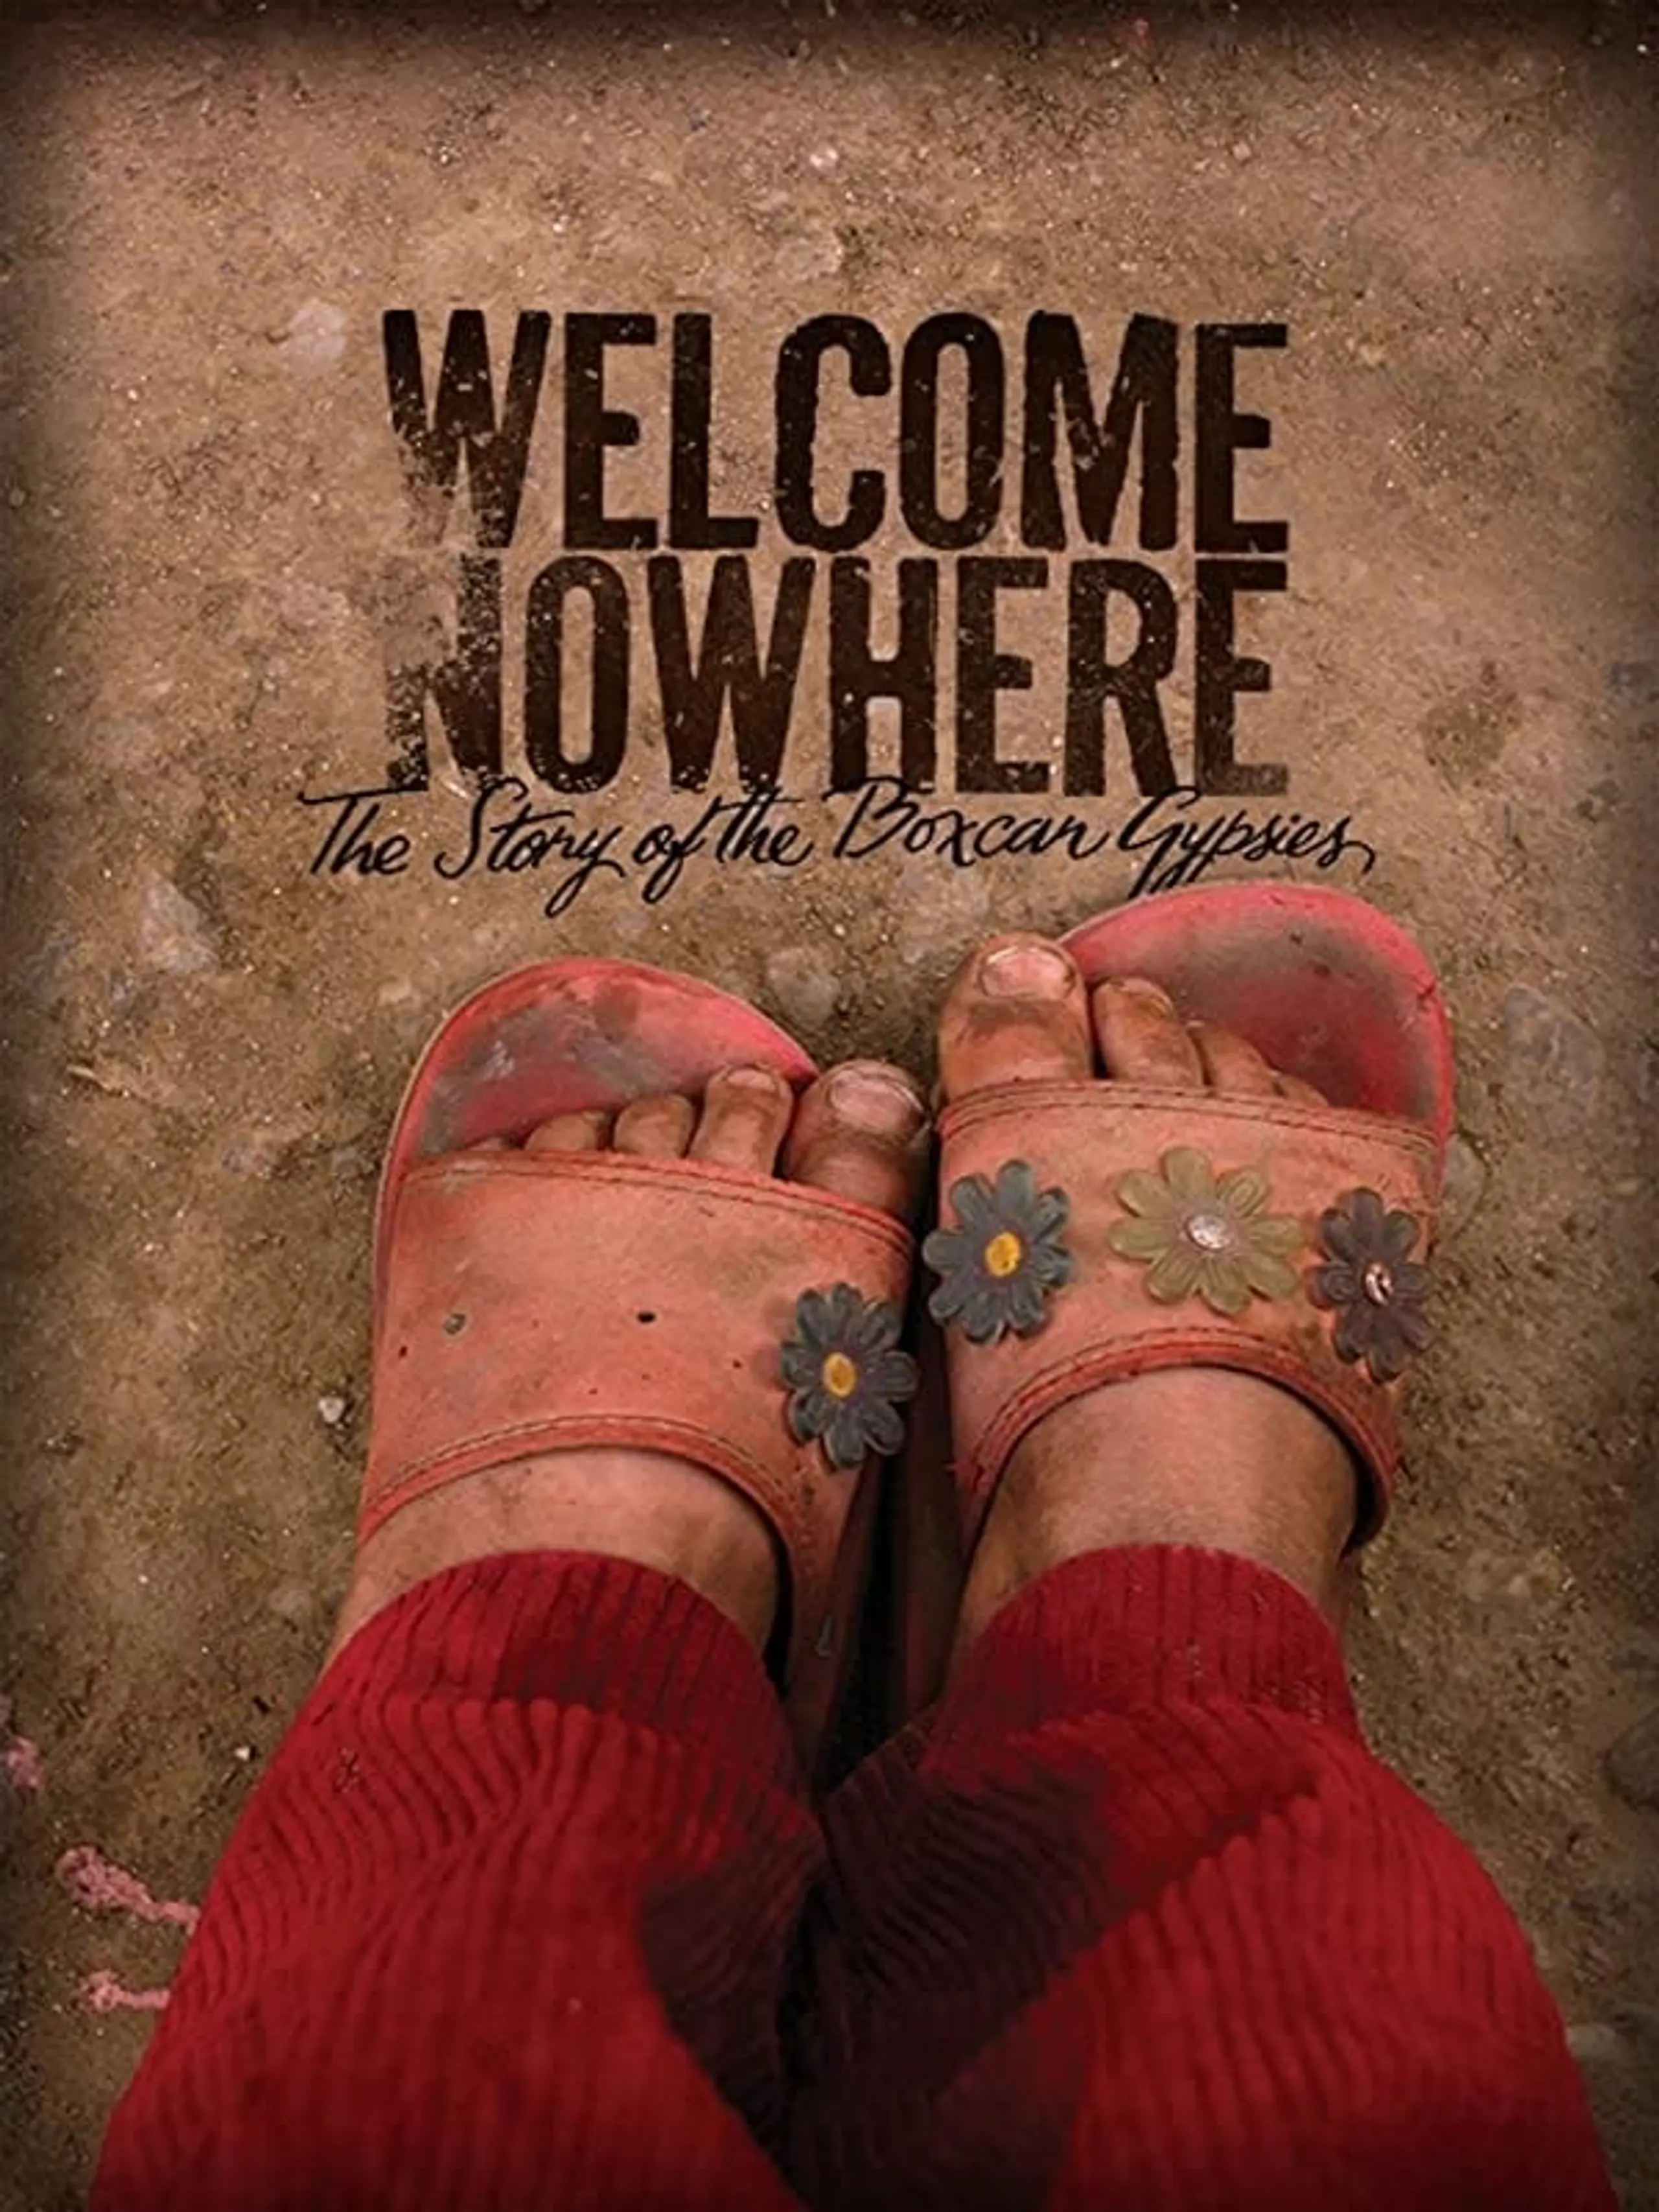 Welcome Nowhere